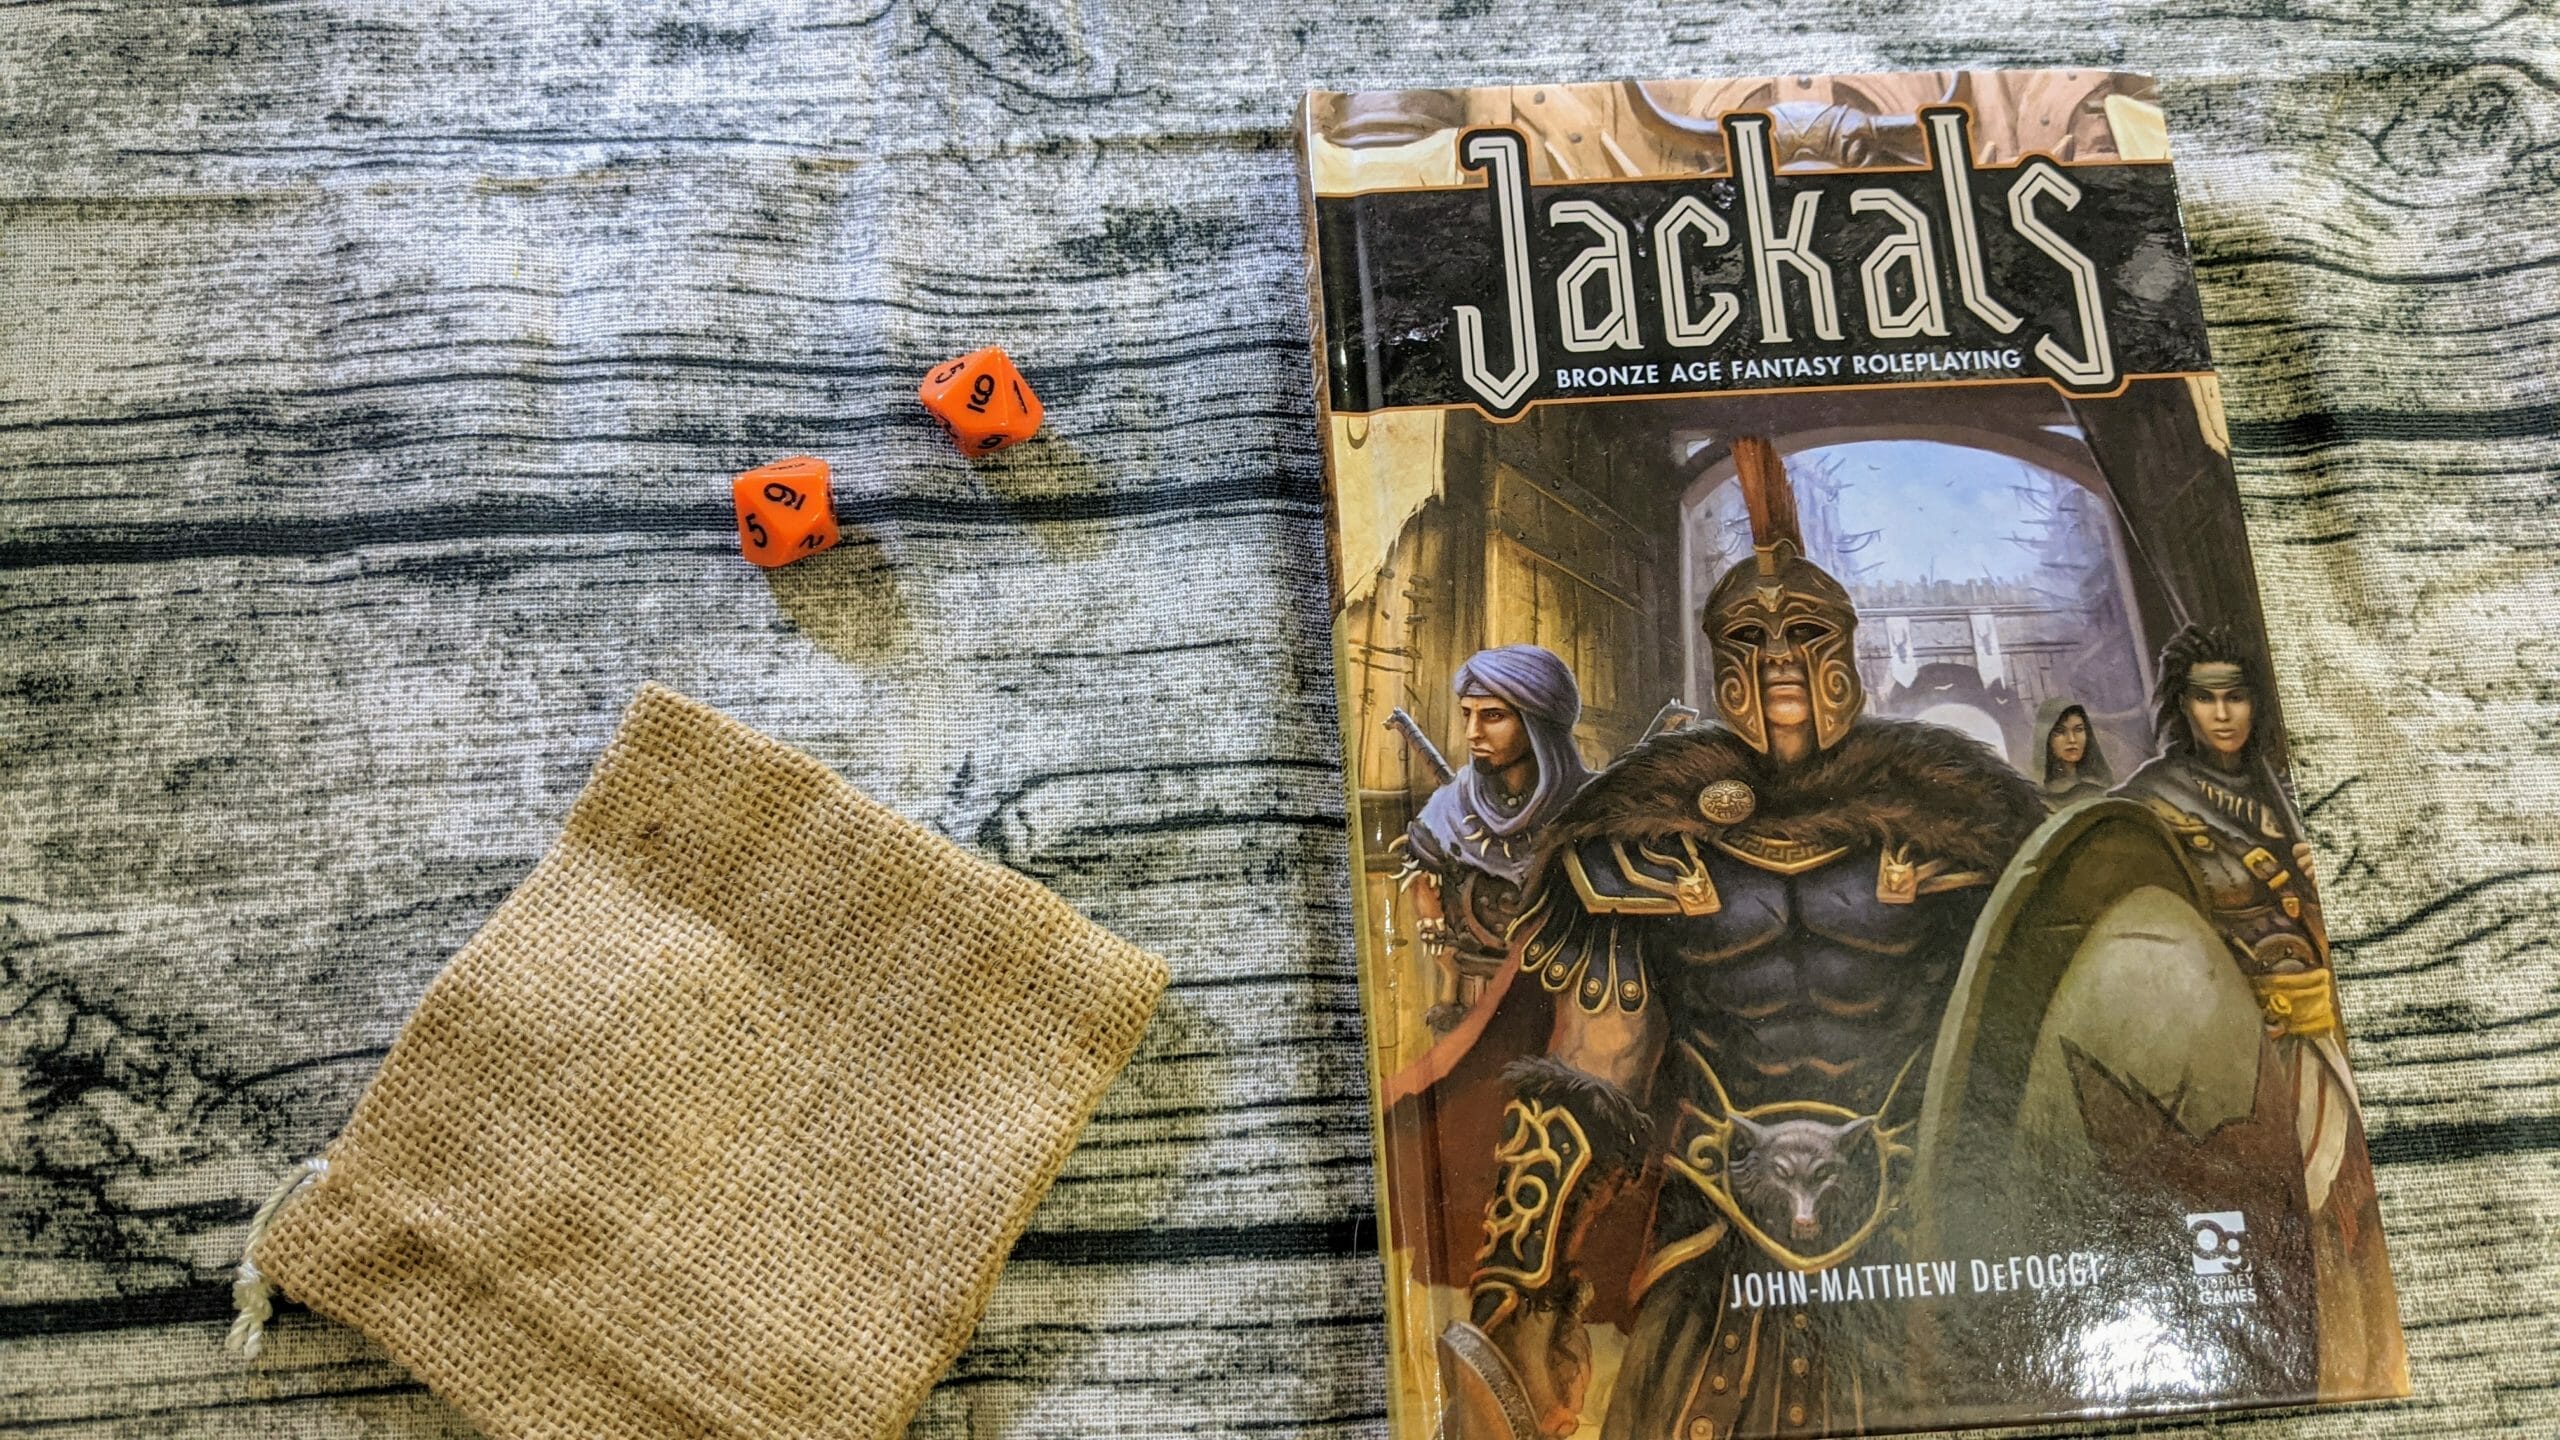 Die by d100 and the bronze sword: A review of the Jackals fantasy RPG